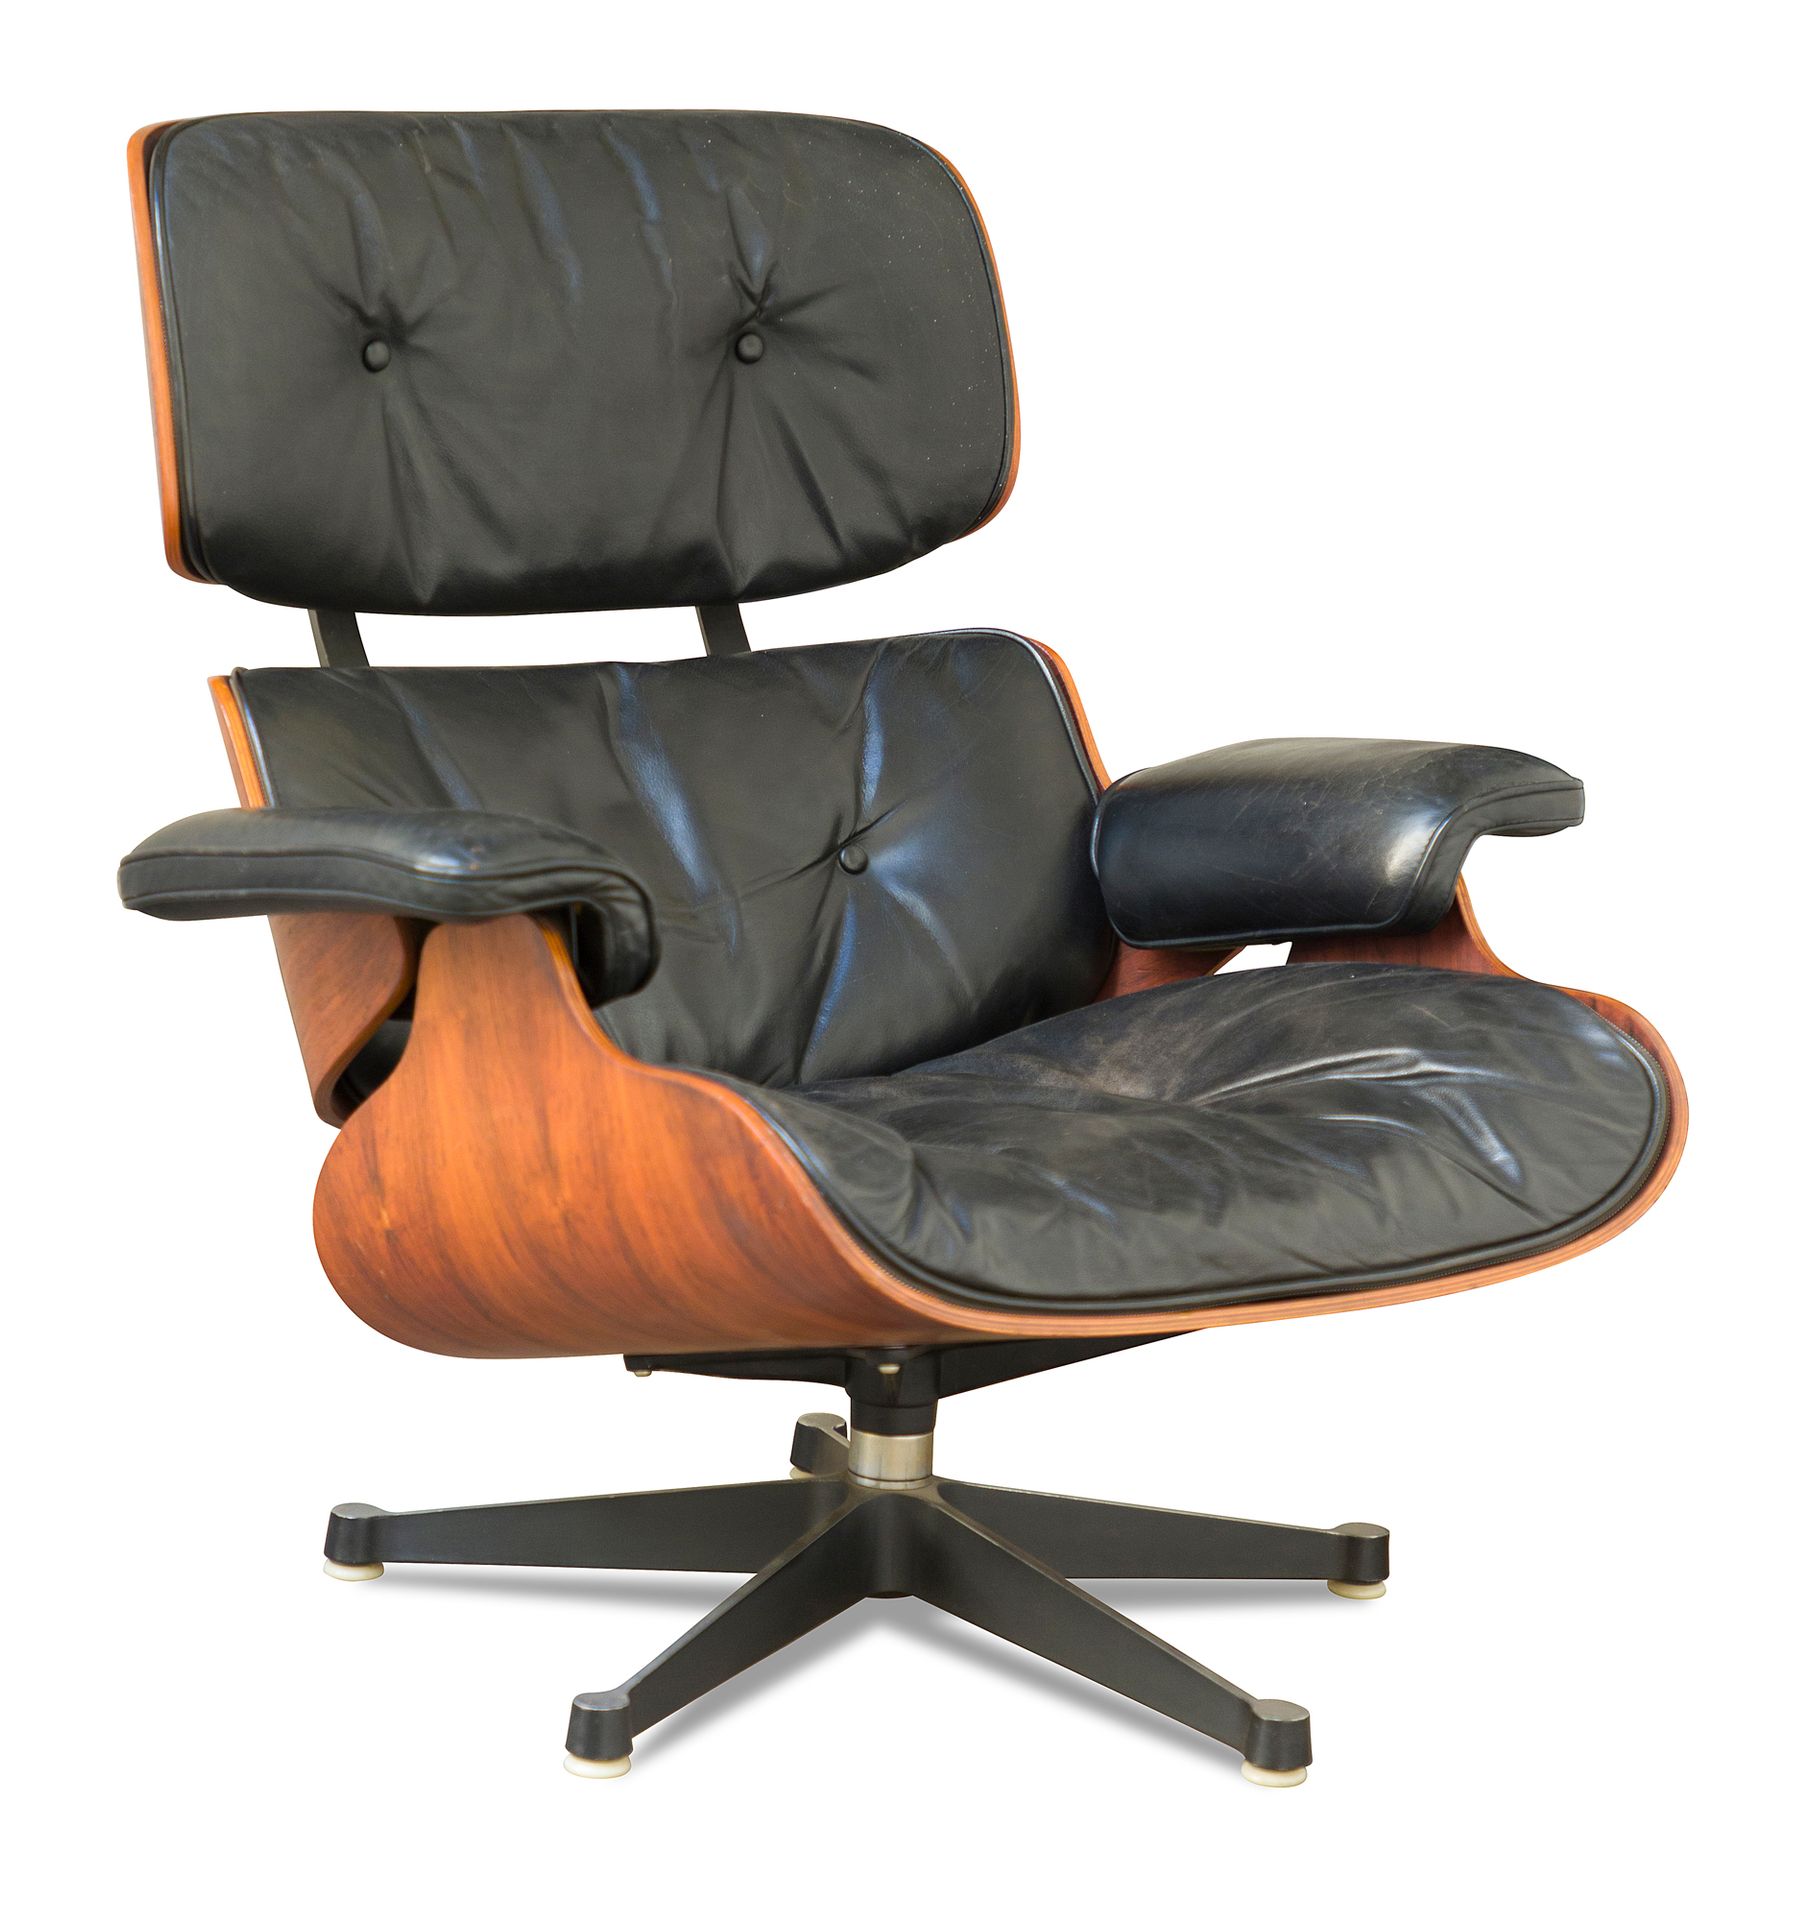 Charles et Ray EAMES (XXe siècle) Poltrona o Lounge chair
Early edition
Pelle e &hellip;